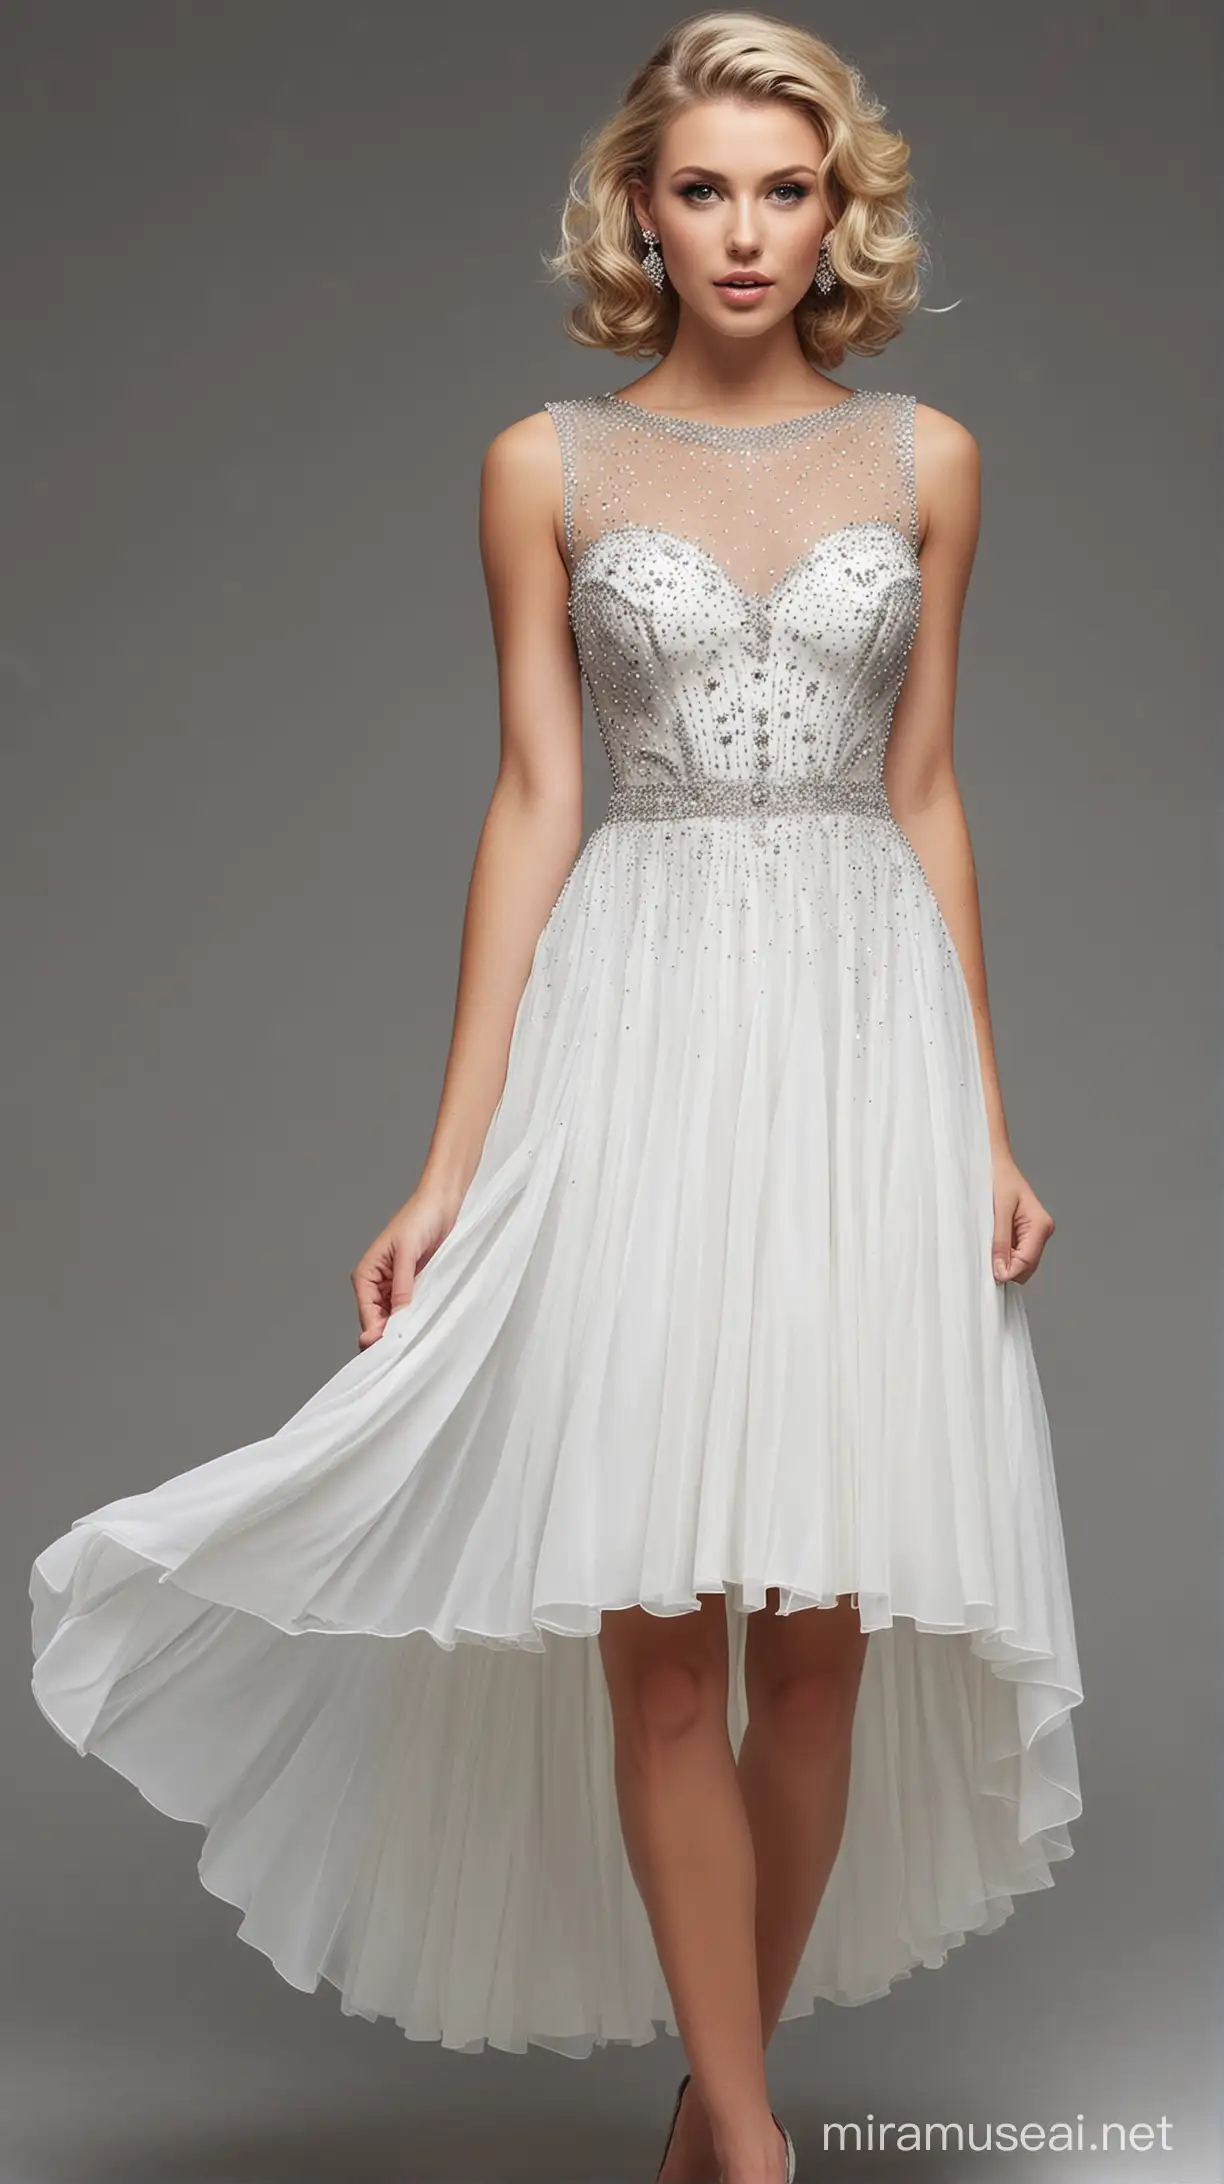 I want same dress with an expensive hair style.

Should be a white lady. The dress should have beautiful crystals because it's a party dress. It must be short or mini and fitting.